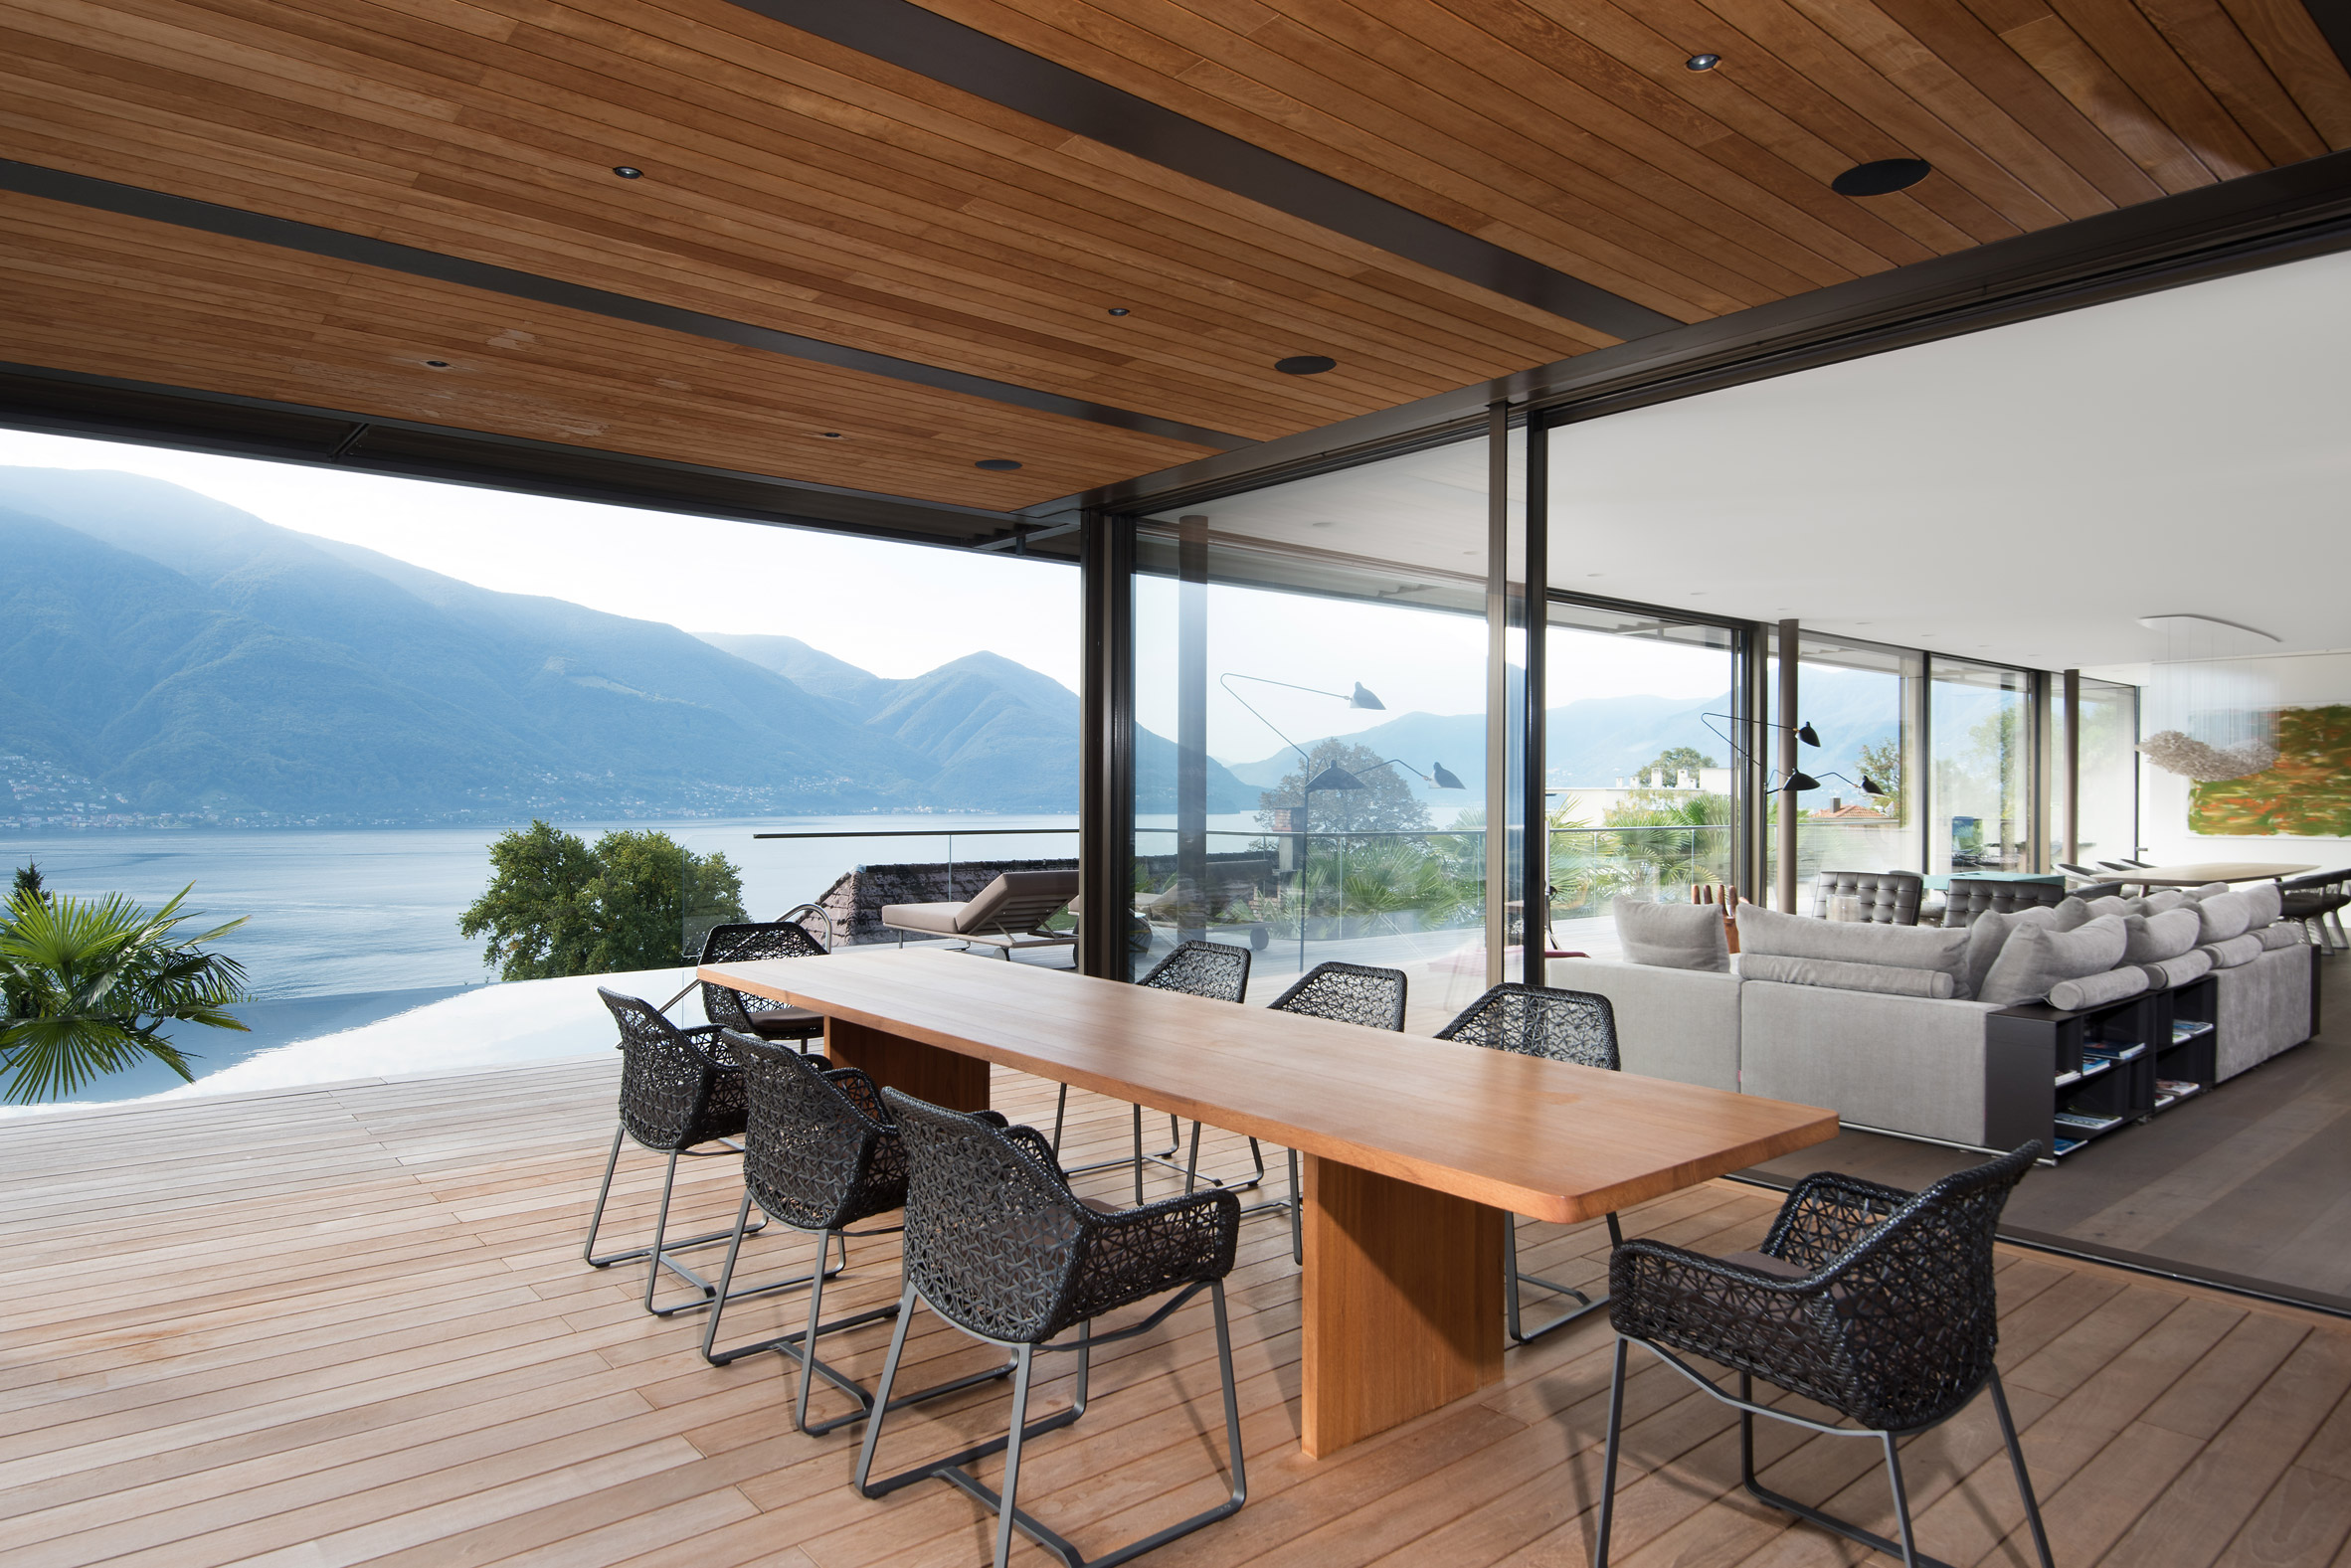 Covered outdoor dining terrace inside a cantilevered house by Küchel Architects in Switzerland